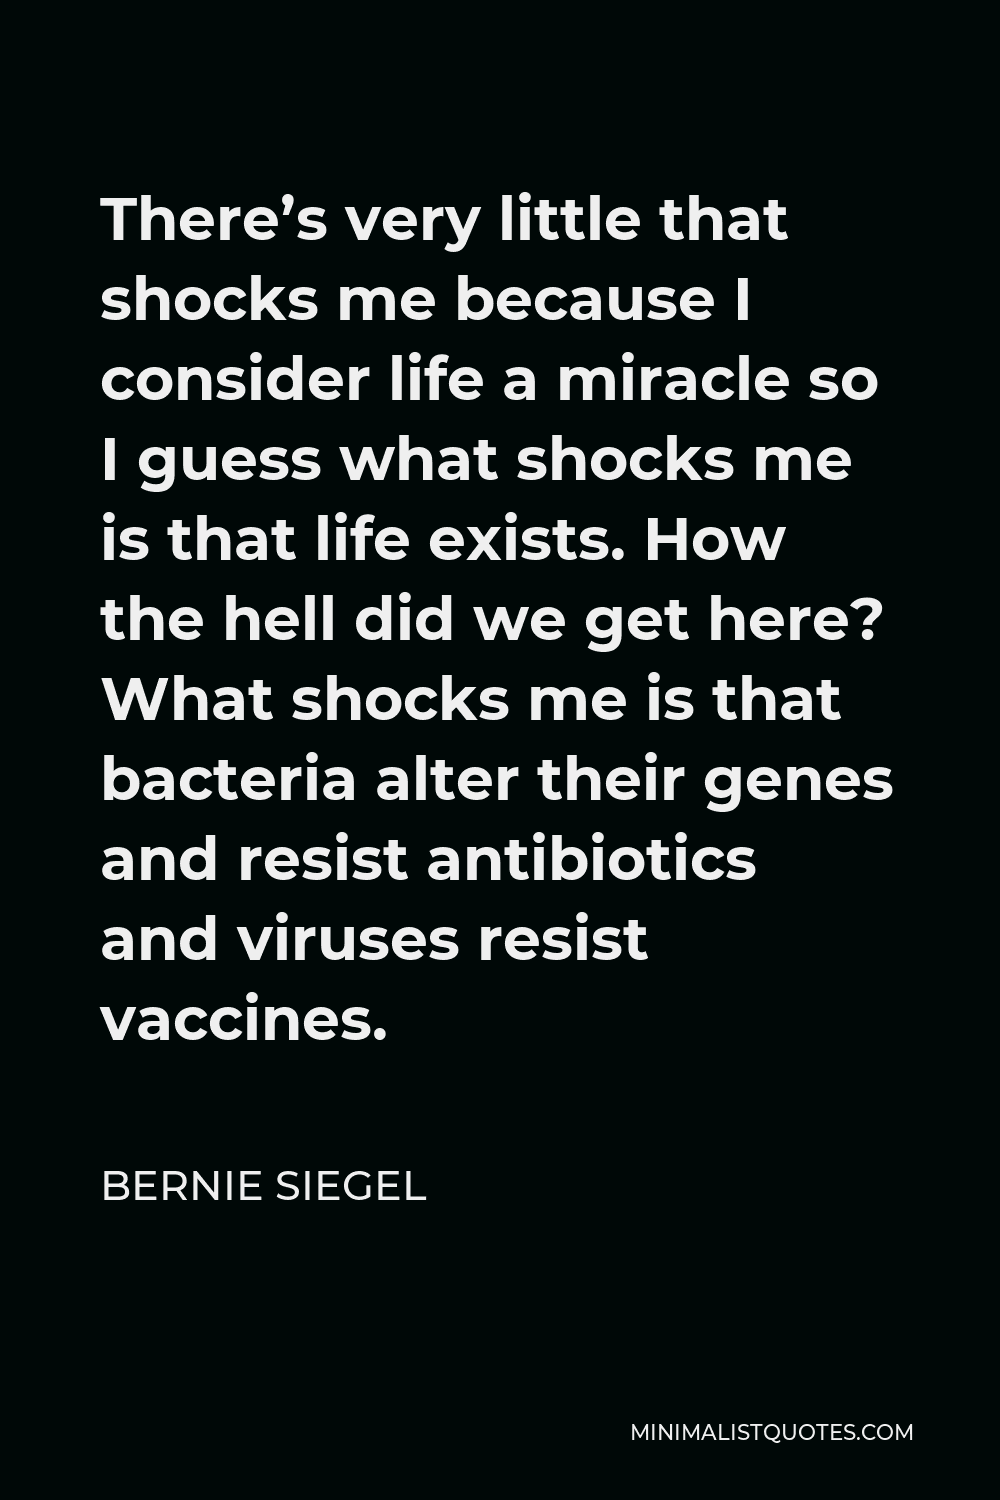 Bernie Siegel Quote - There’s very little that shocks me because I consider life a miracle so I guess what shocks me is that life exists. How the hell did we get here? What shocks me is that bacteria alter their genes and resist antibiotics and viruses resist vaccines.